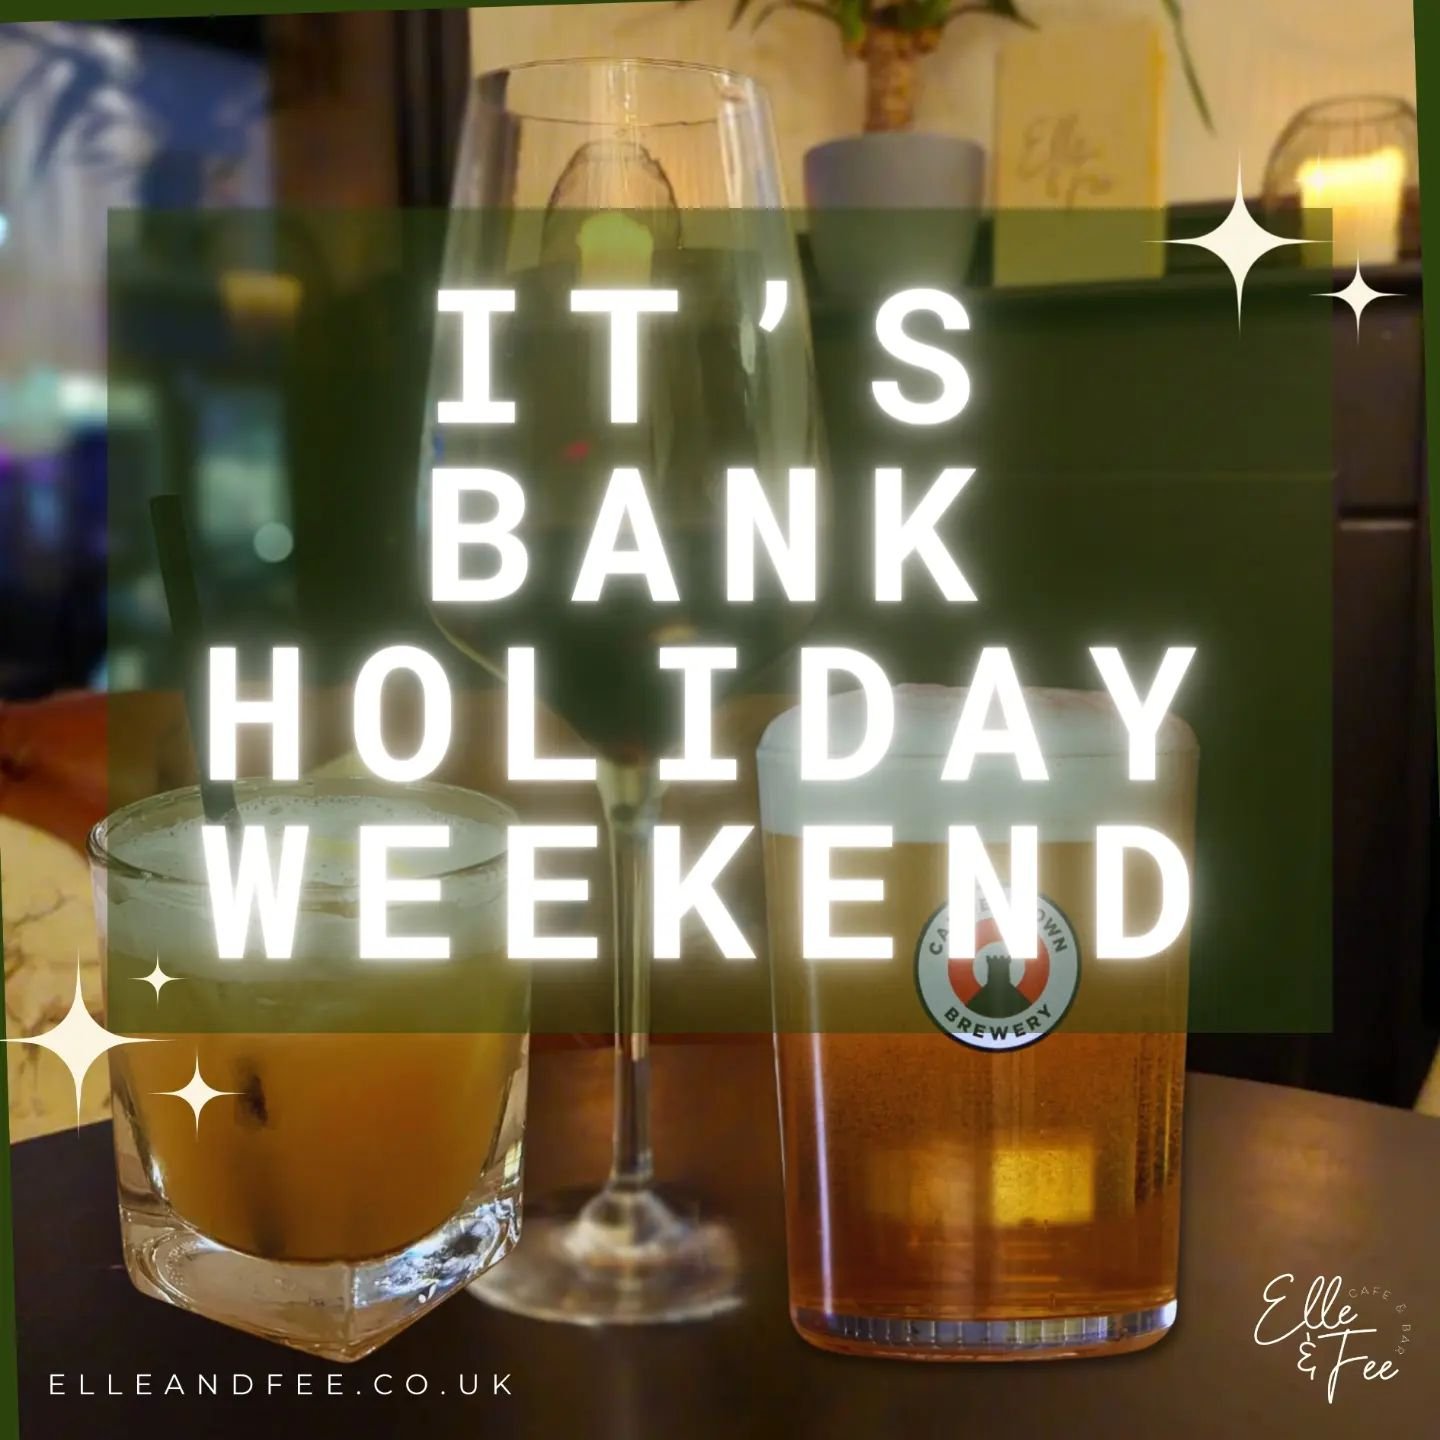 It's Bank Holiday weekend! Come on down and try one with friends and family. 

Don't forget our Friday offer - Fiver Fridays! &pound;5 MARGARITAS, GLASS OF PROSECCO OR DRAUGHT BEER 4-6PM!

#surreyrestaurant #surreycafe #surreybrunch #ashfordsurrey #s